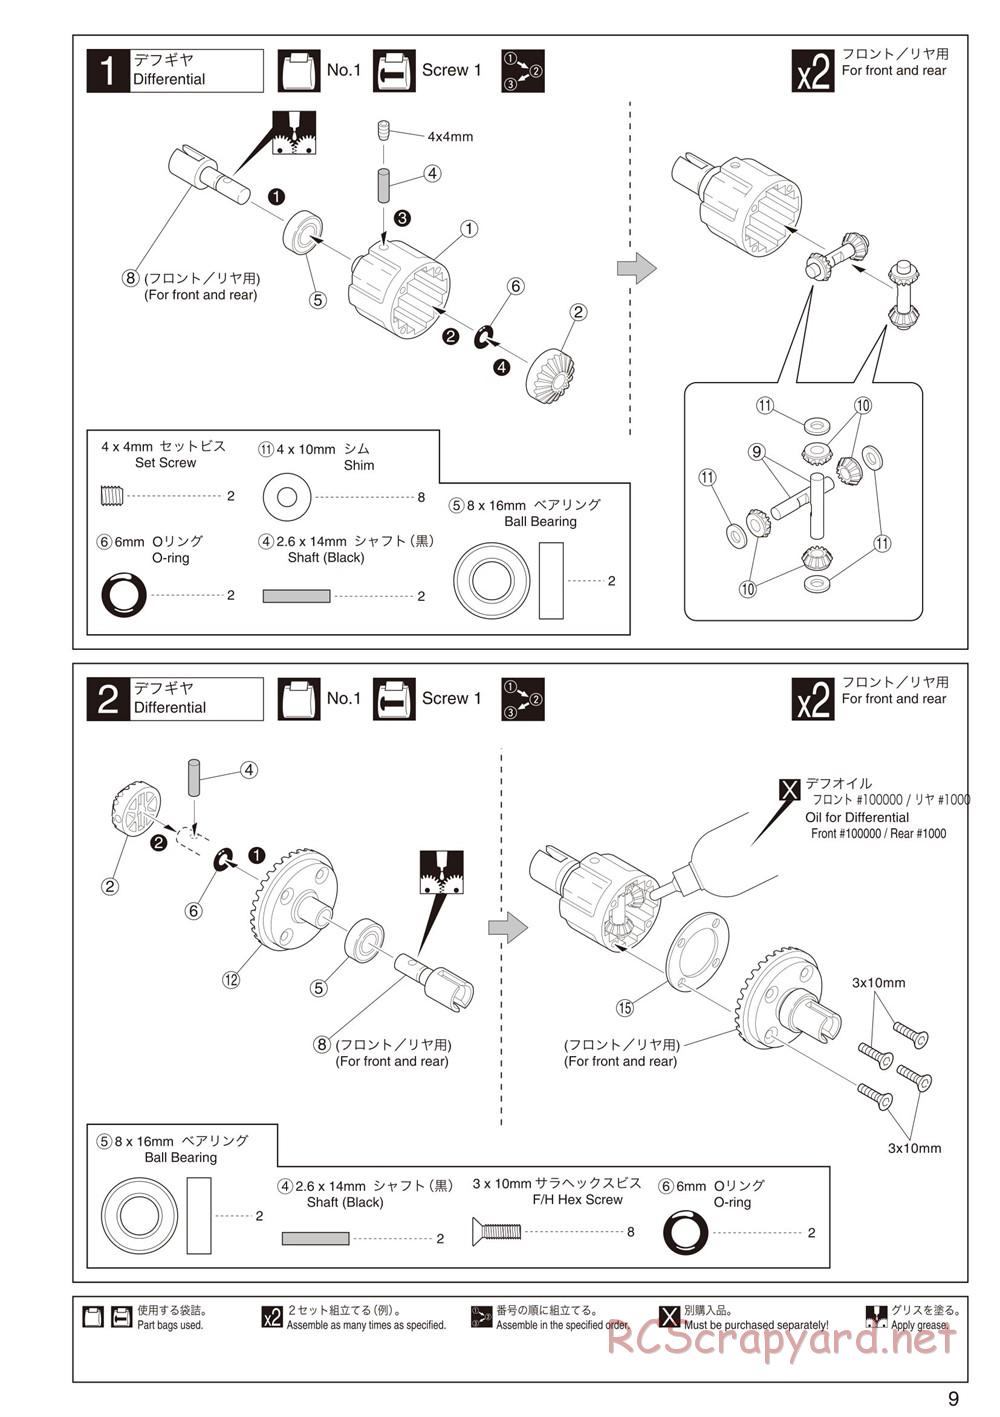 Kyosho - Inferno GT2 - Manual - Page 9